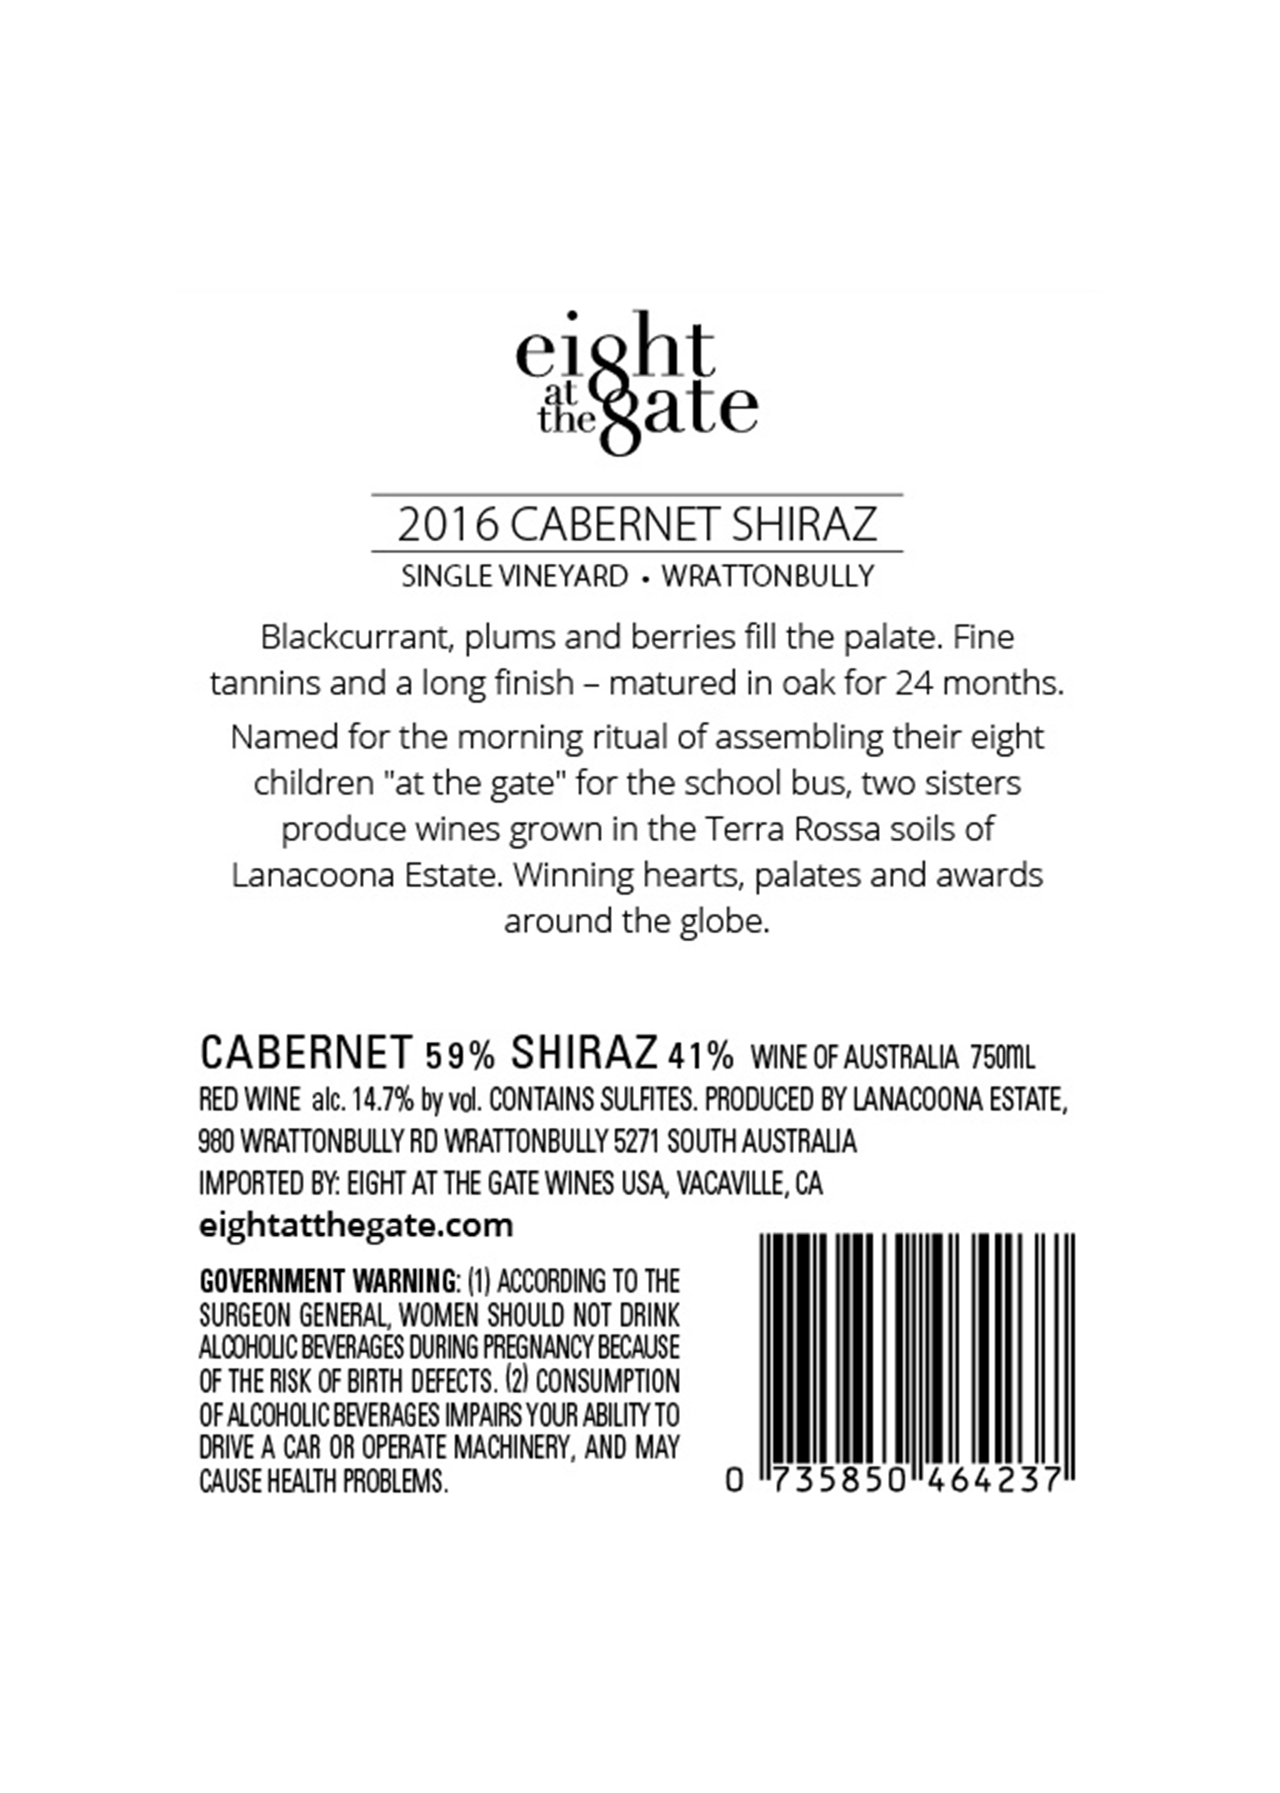 Eight at the Gate 2016 Shiraz back label